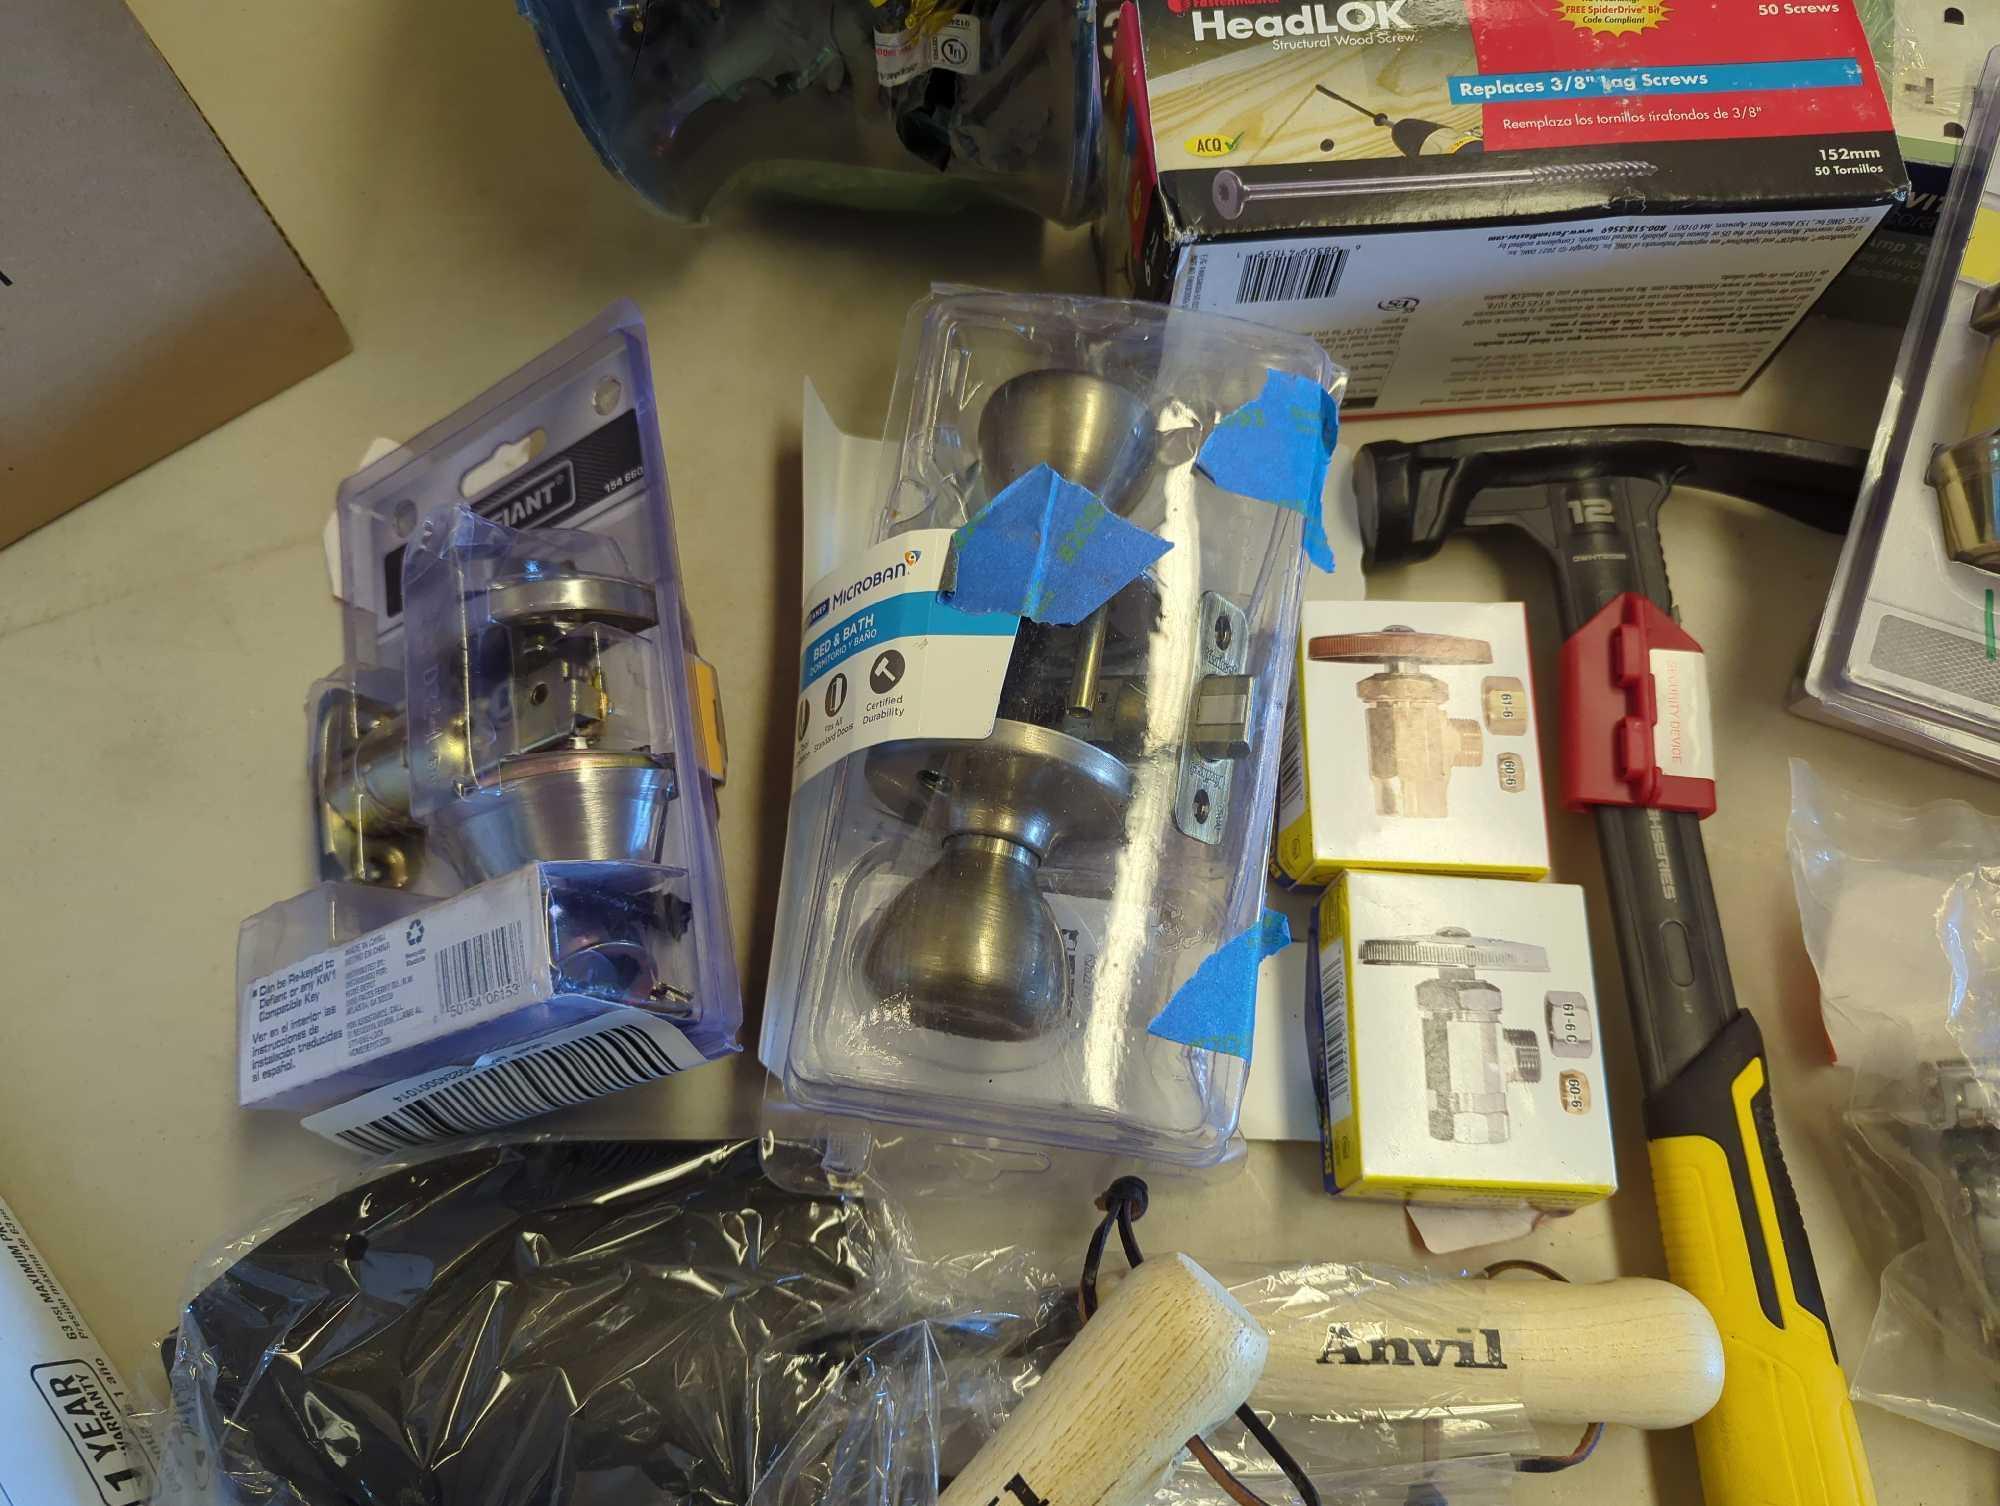 Box lot of assorted items including anvil hand trowel, basis designs form, tissue holder,